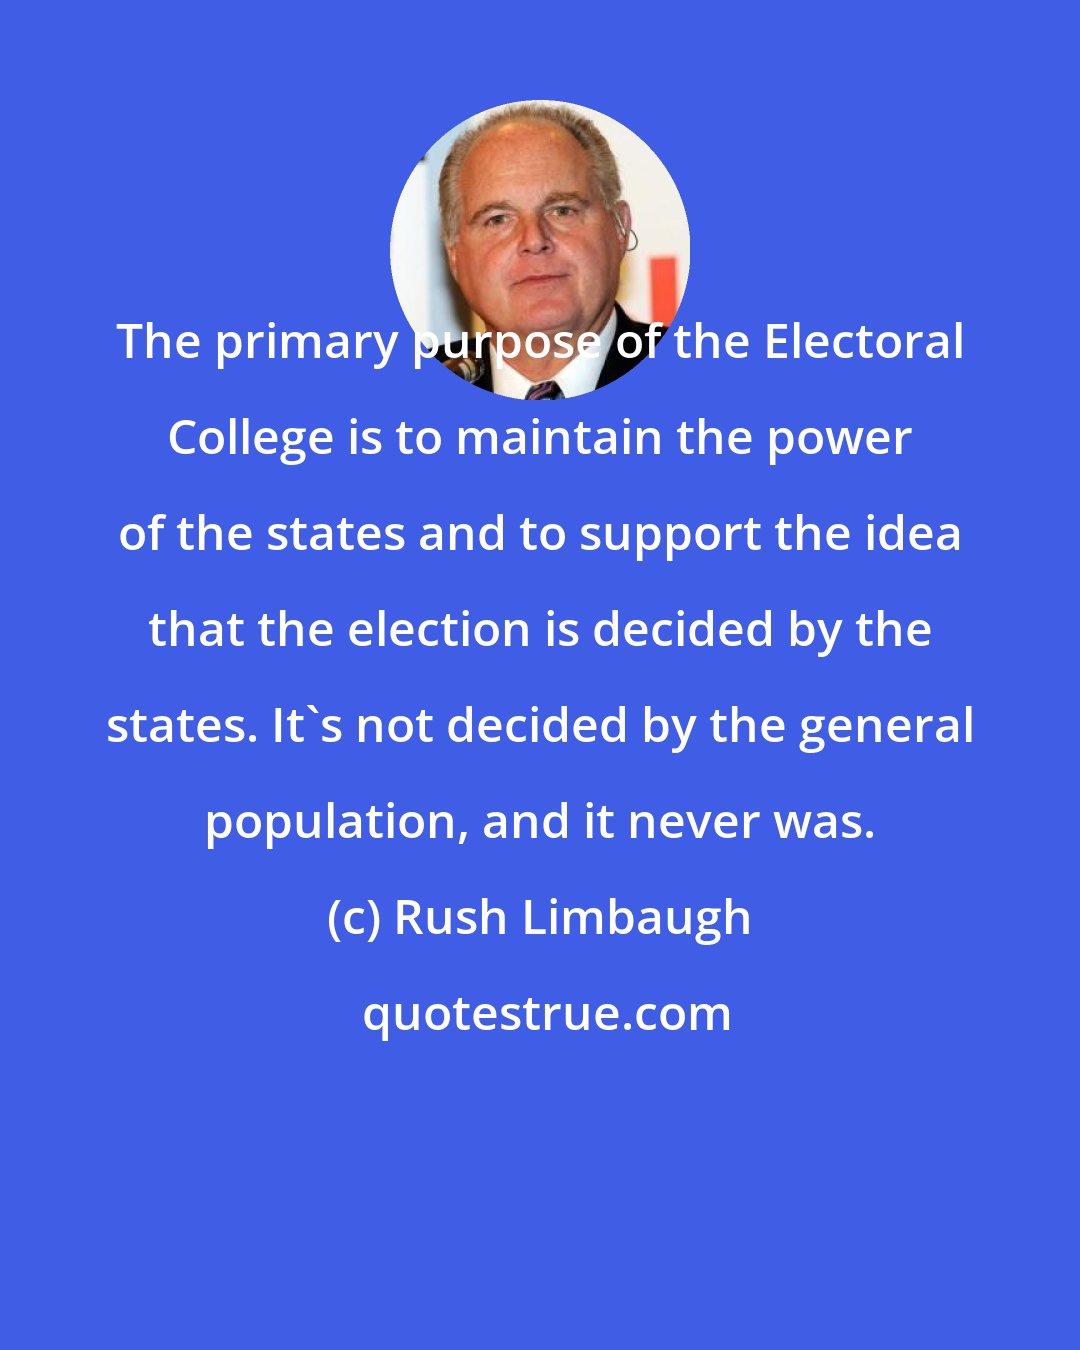 Rush Limbaugh: The primary purpose of the Electoral College is to maintain the power of the states and to support the idea that the election is decided by the states. It's not decided by the general population, and it never was.